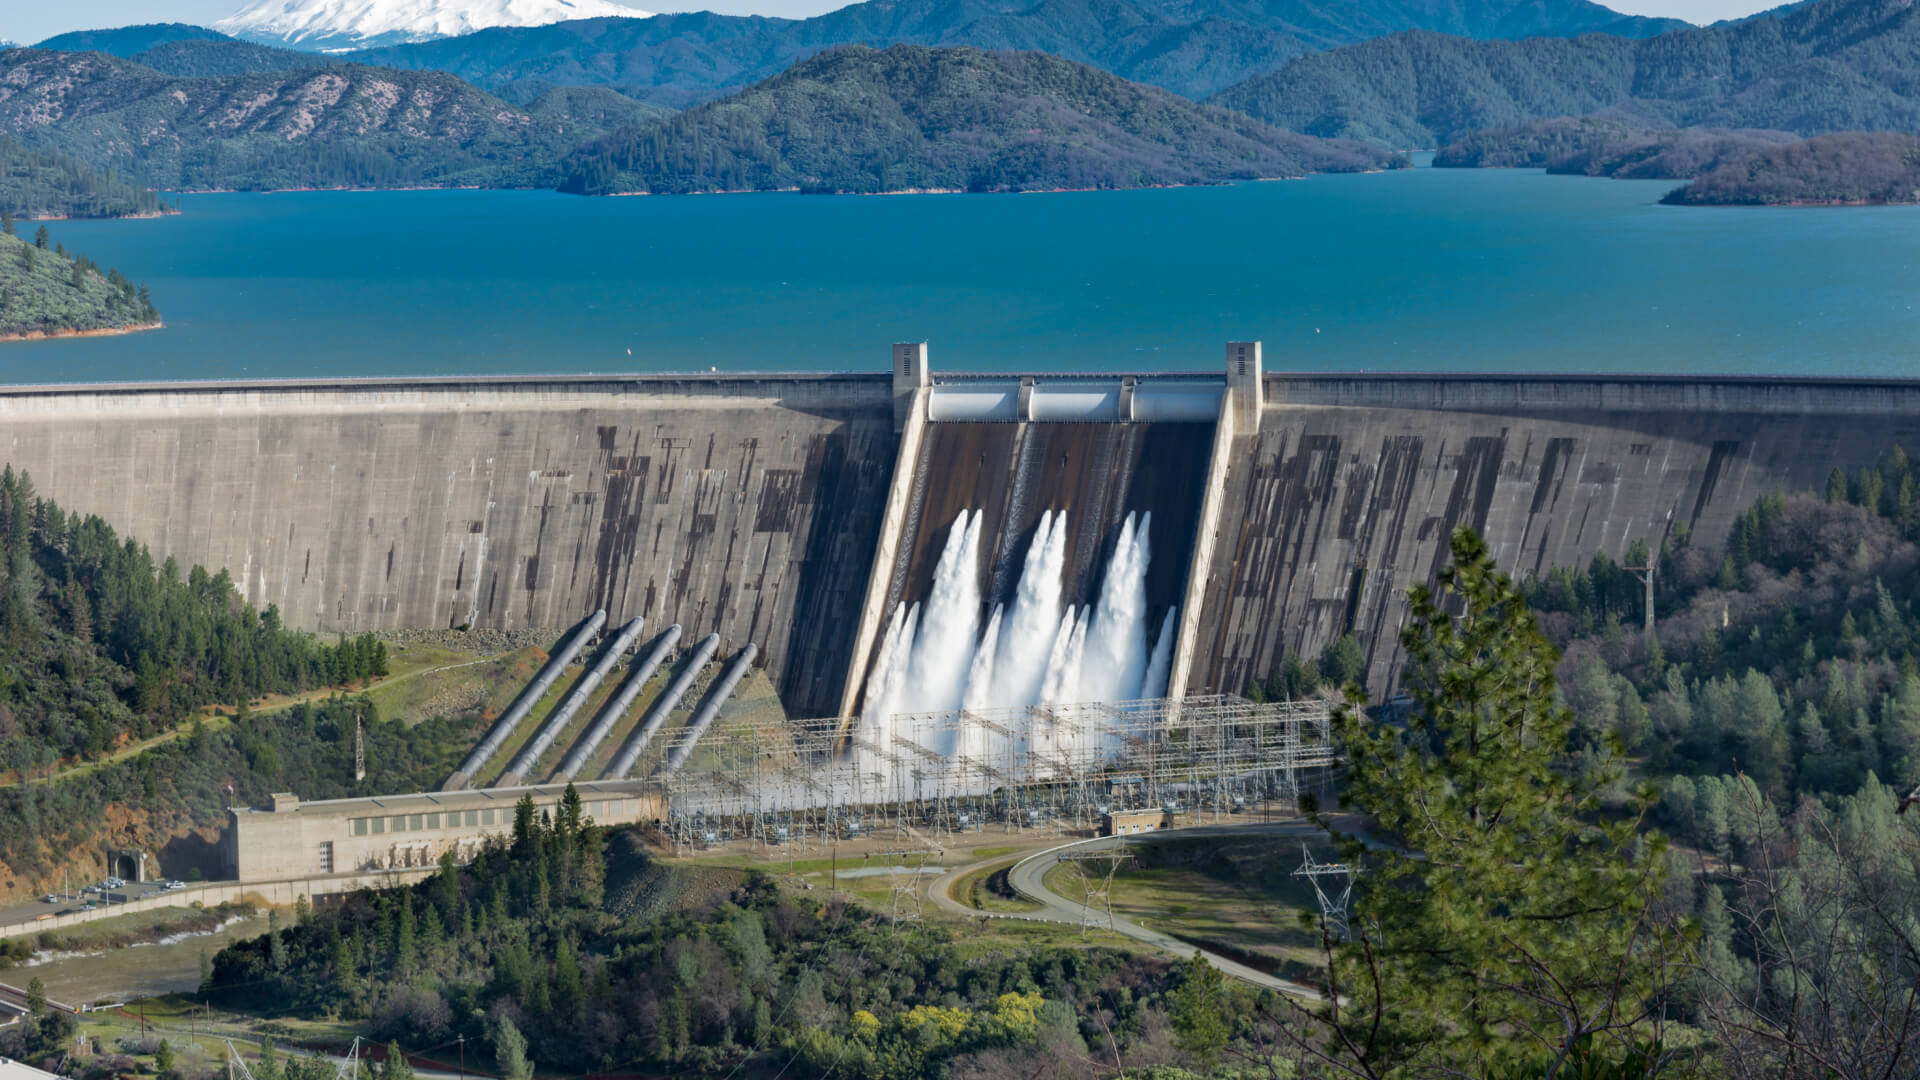 picture-shasta-dam-surrounded-by-roads-trees-with-lake-mountains